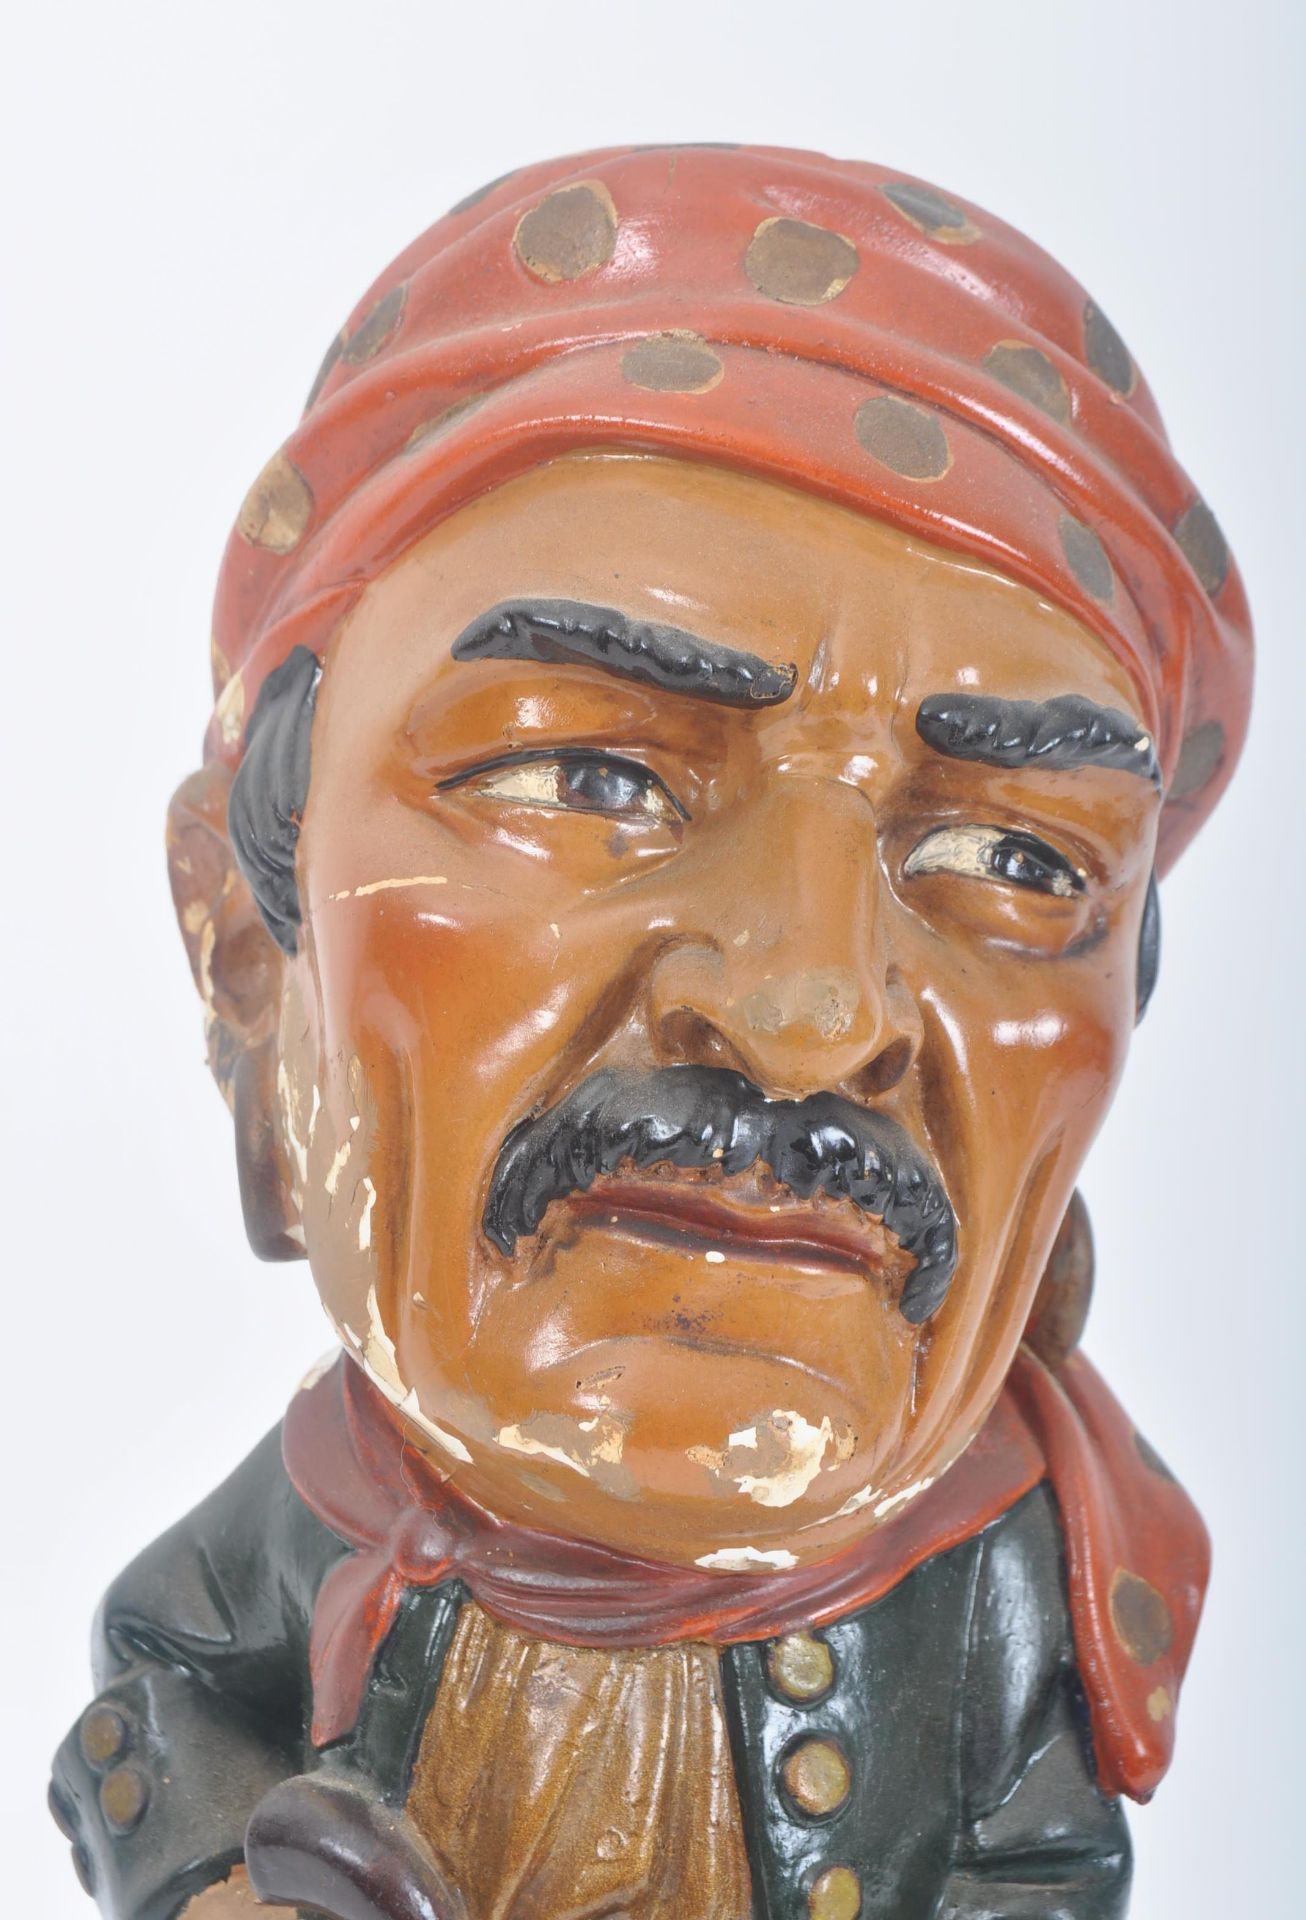 WILLS TOBACCO - SHOP DISPLAY FIGURE FOR WILLS'S PIRATE SHAG - Image 3 of 6